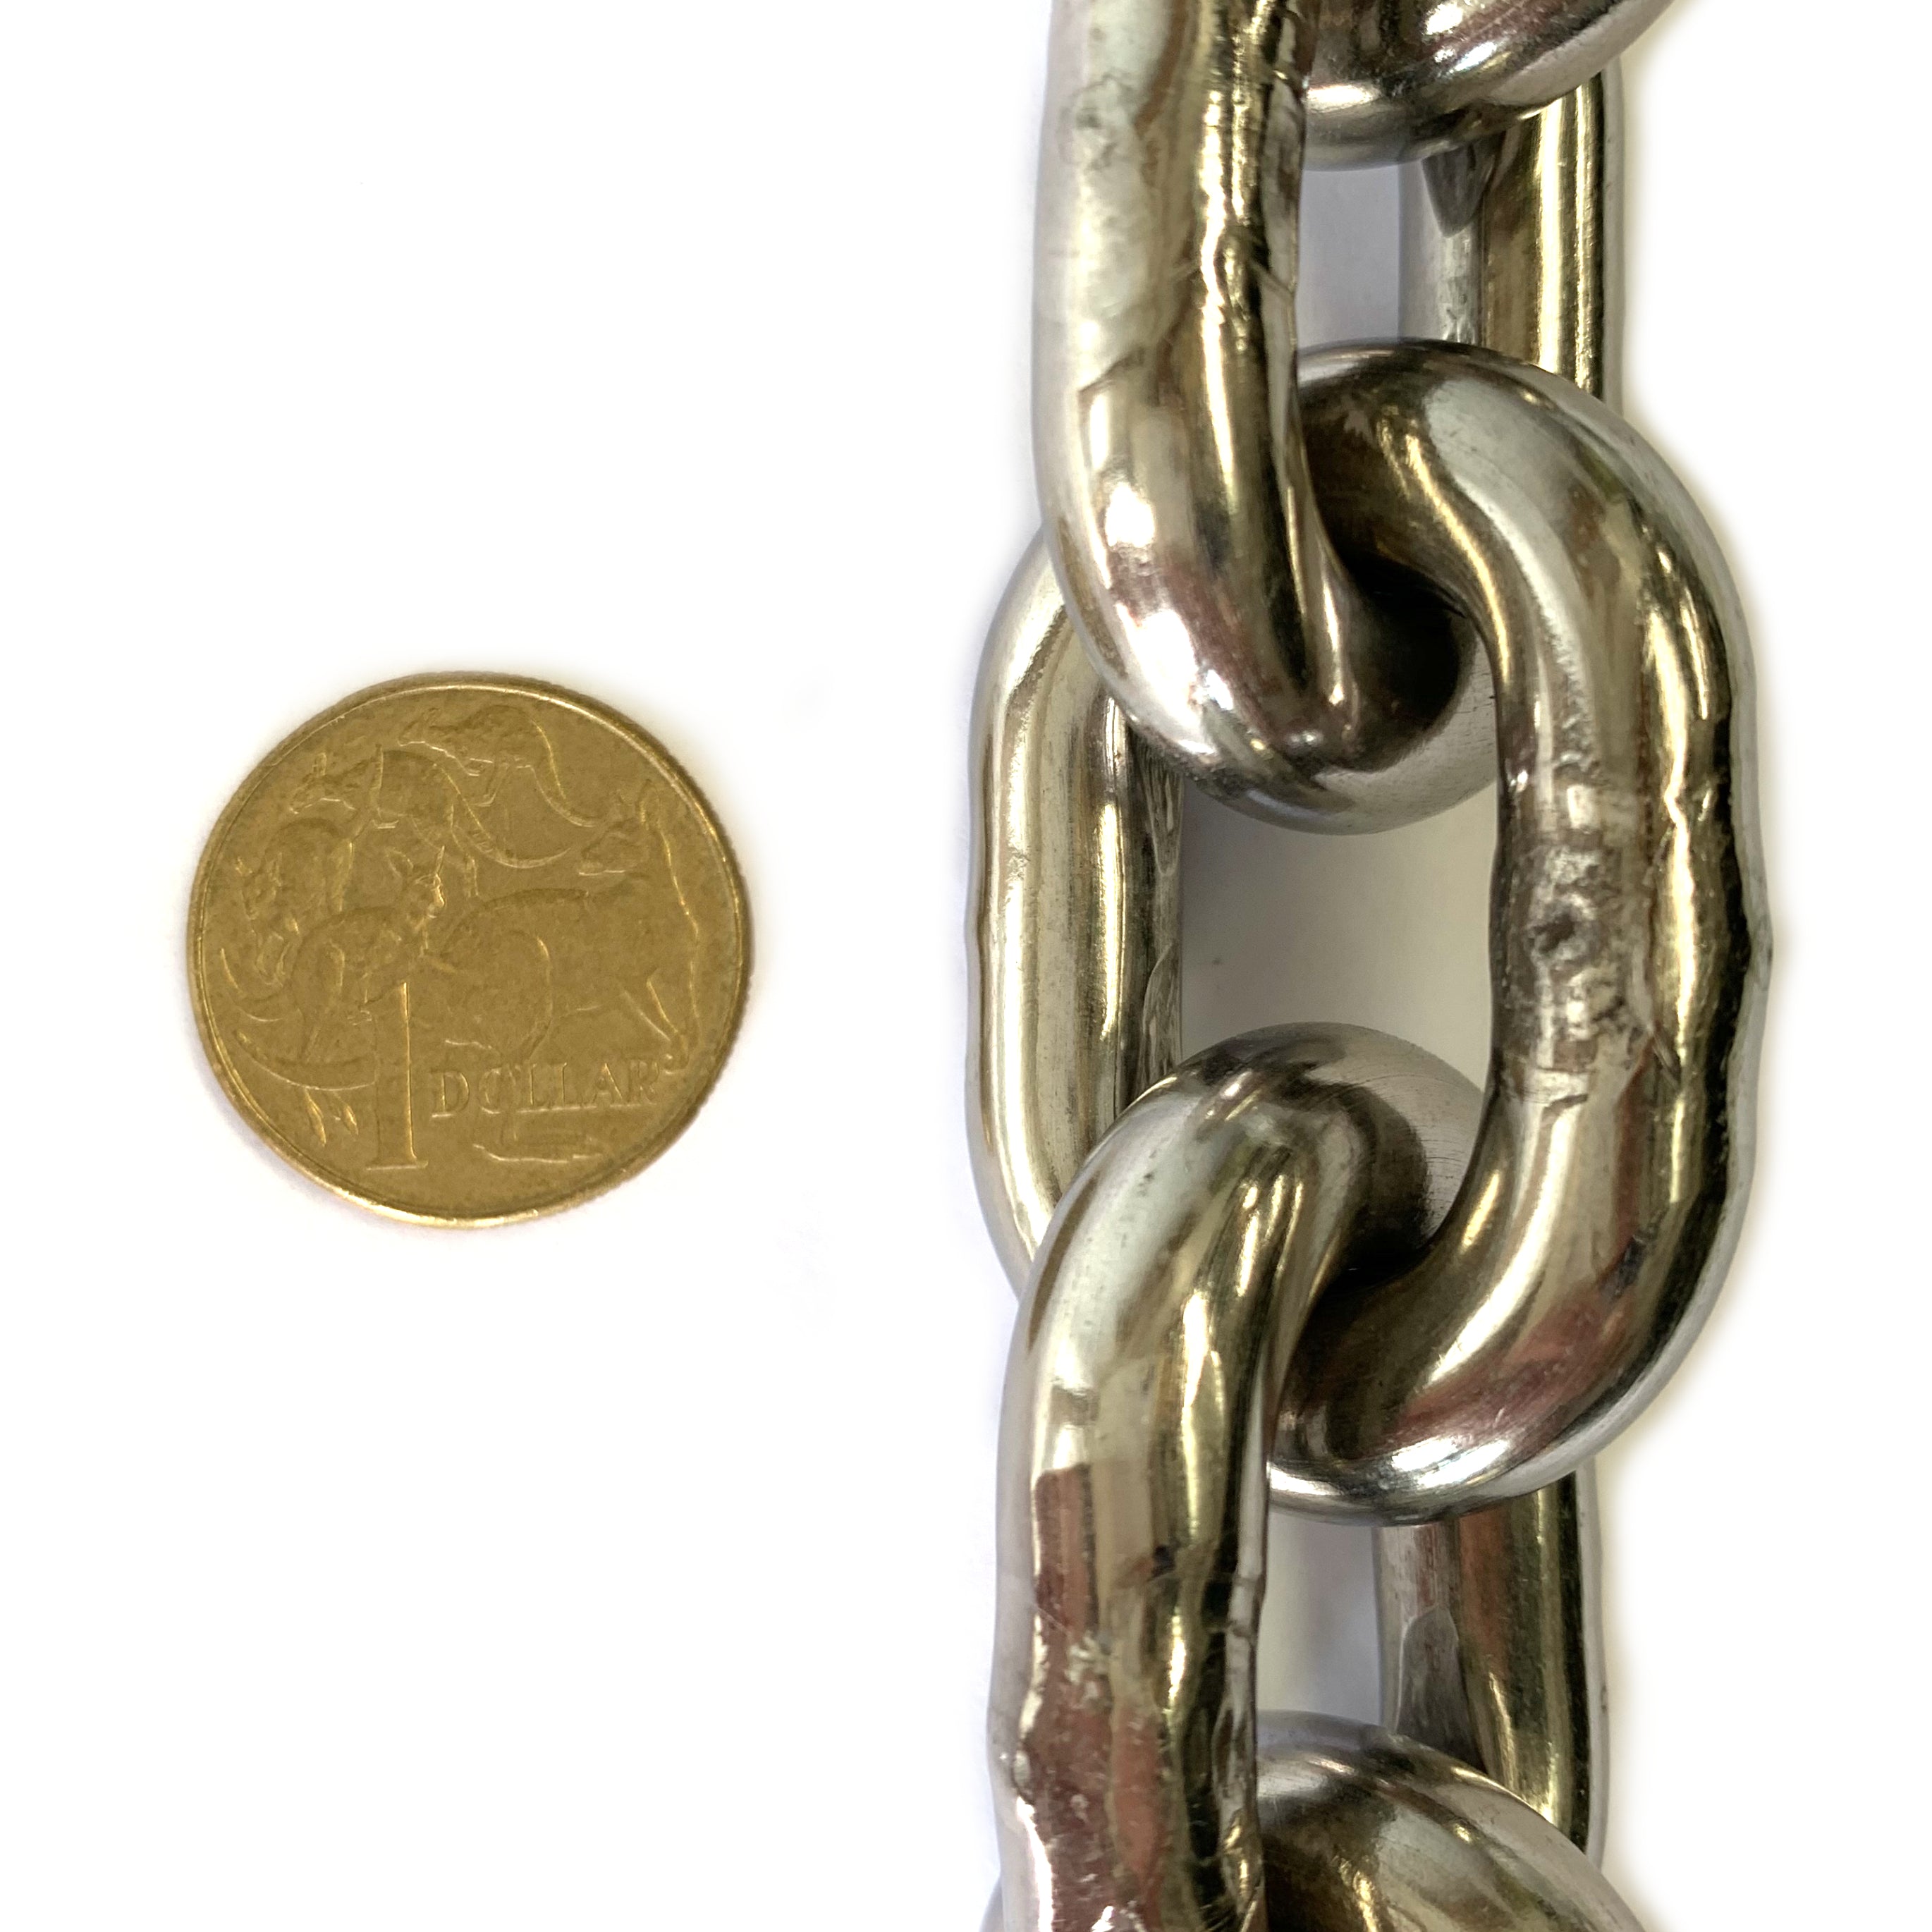 10mm stainless steel welded short link chain, order by the metre. Australia.